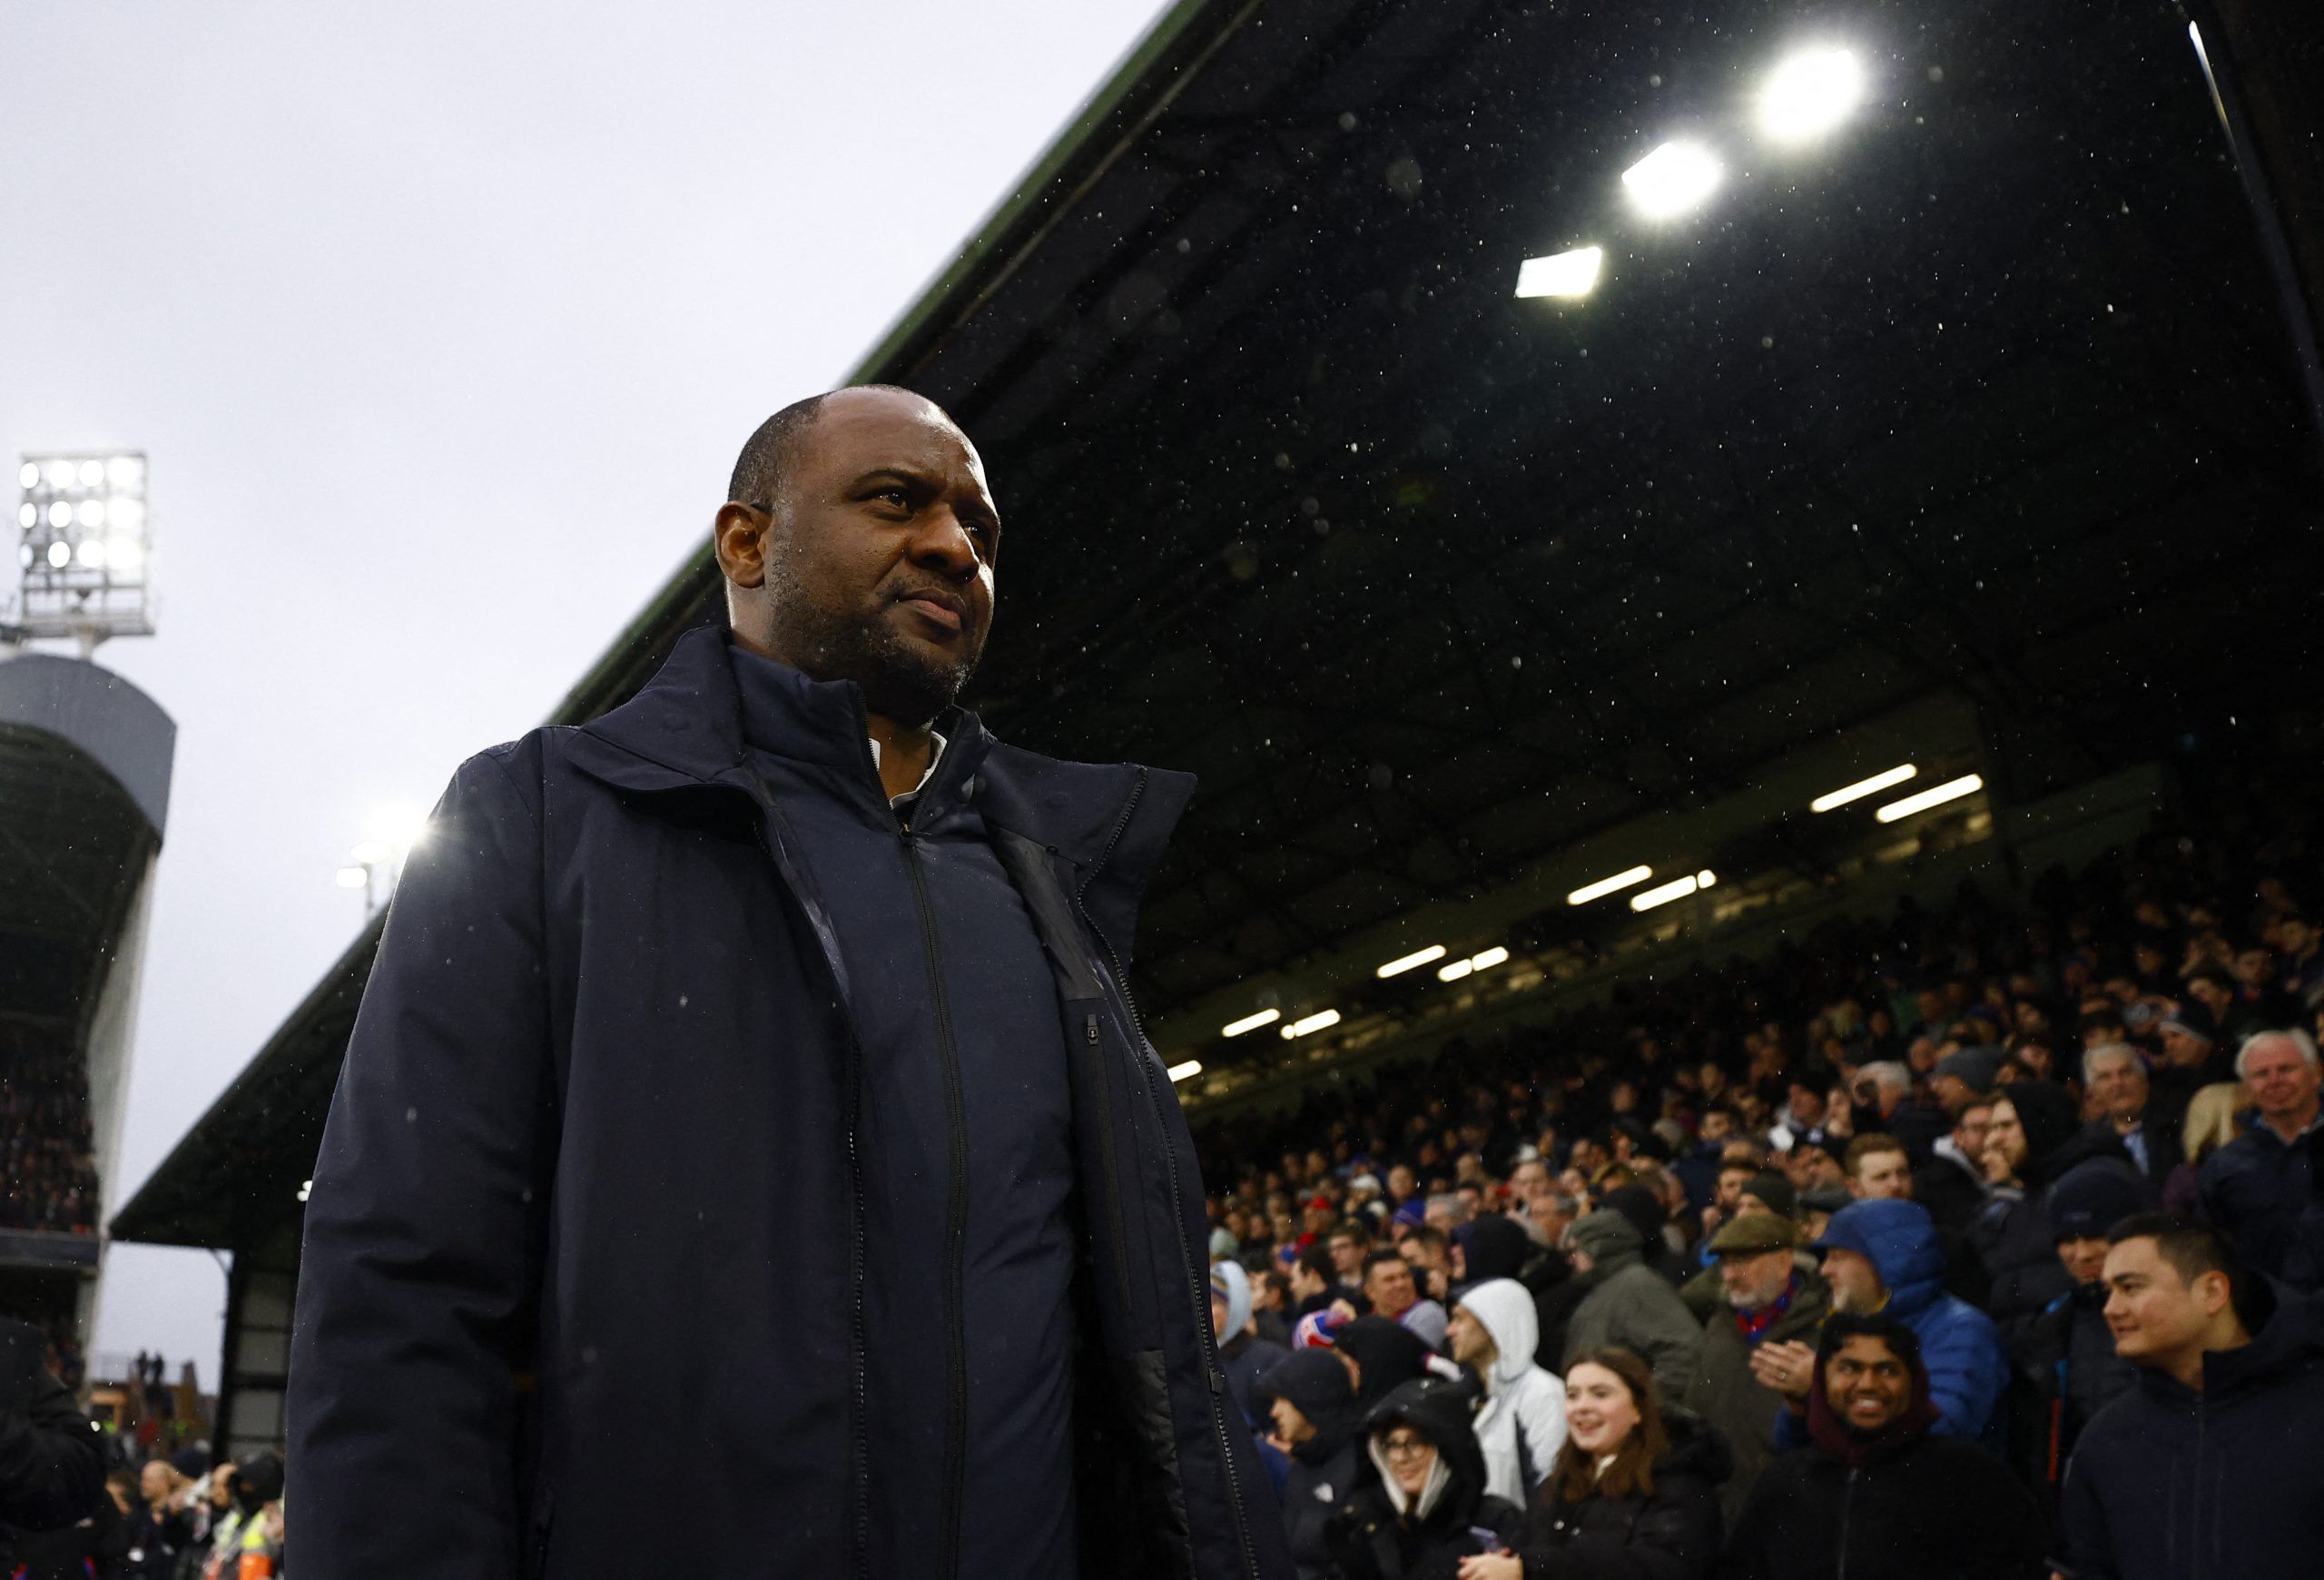 Soccer Football - Premier League - Crystal Palace v Manchester City - Selhurst Park, London, Britain - March 11, 2023 Crystal Palace manager Patrick Vieira before the match Action Images via Reuters/John Sibley EDITORIAL USE ONLY. No use with unauthorized audio, video, data, fixture lists, club/league logos or 'live' services. Online in-match use limited to 75 images, no video emulation. No use in betting, games or single club /league/player publications.  Please contact your account representat